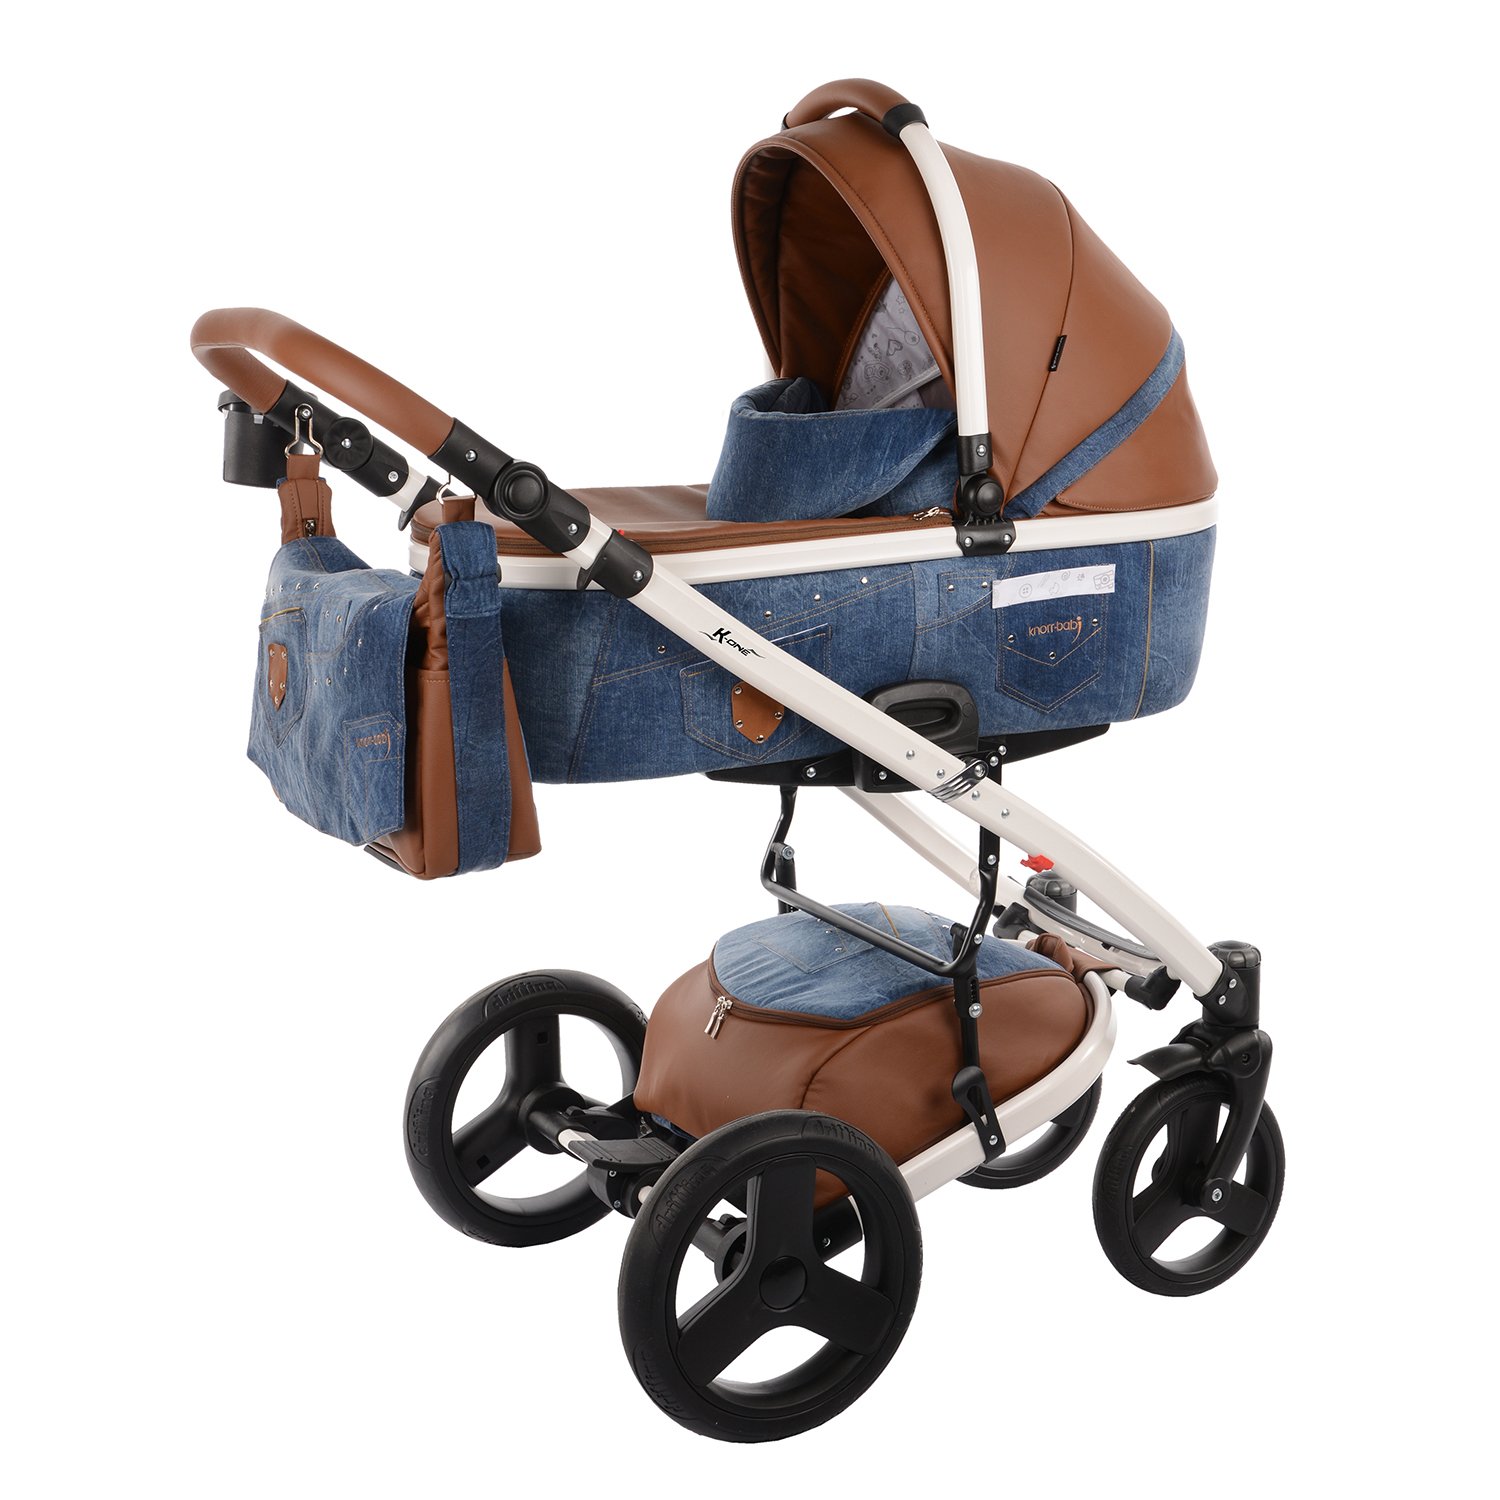 Knorr Baby 2395 1 K One Jeans 2 In 1 Combi Pushchair Blue